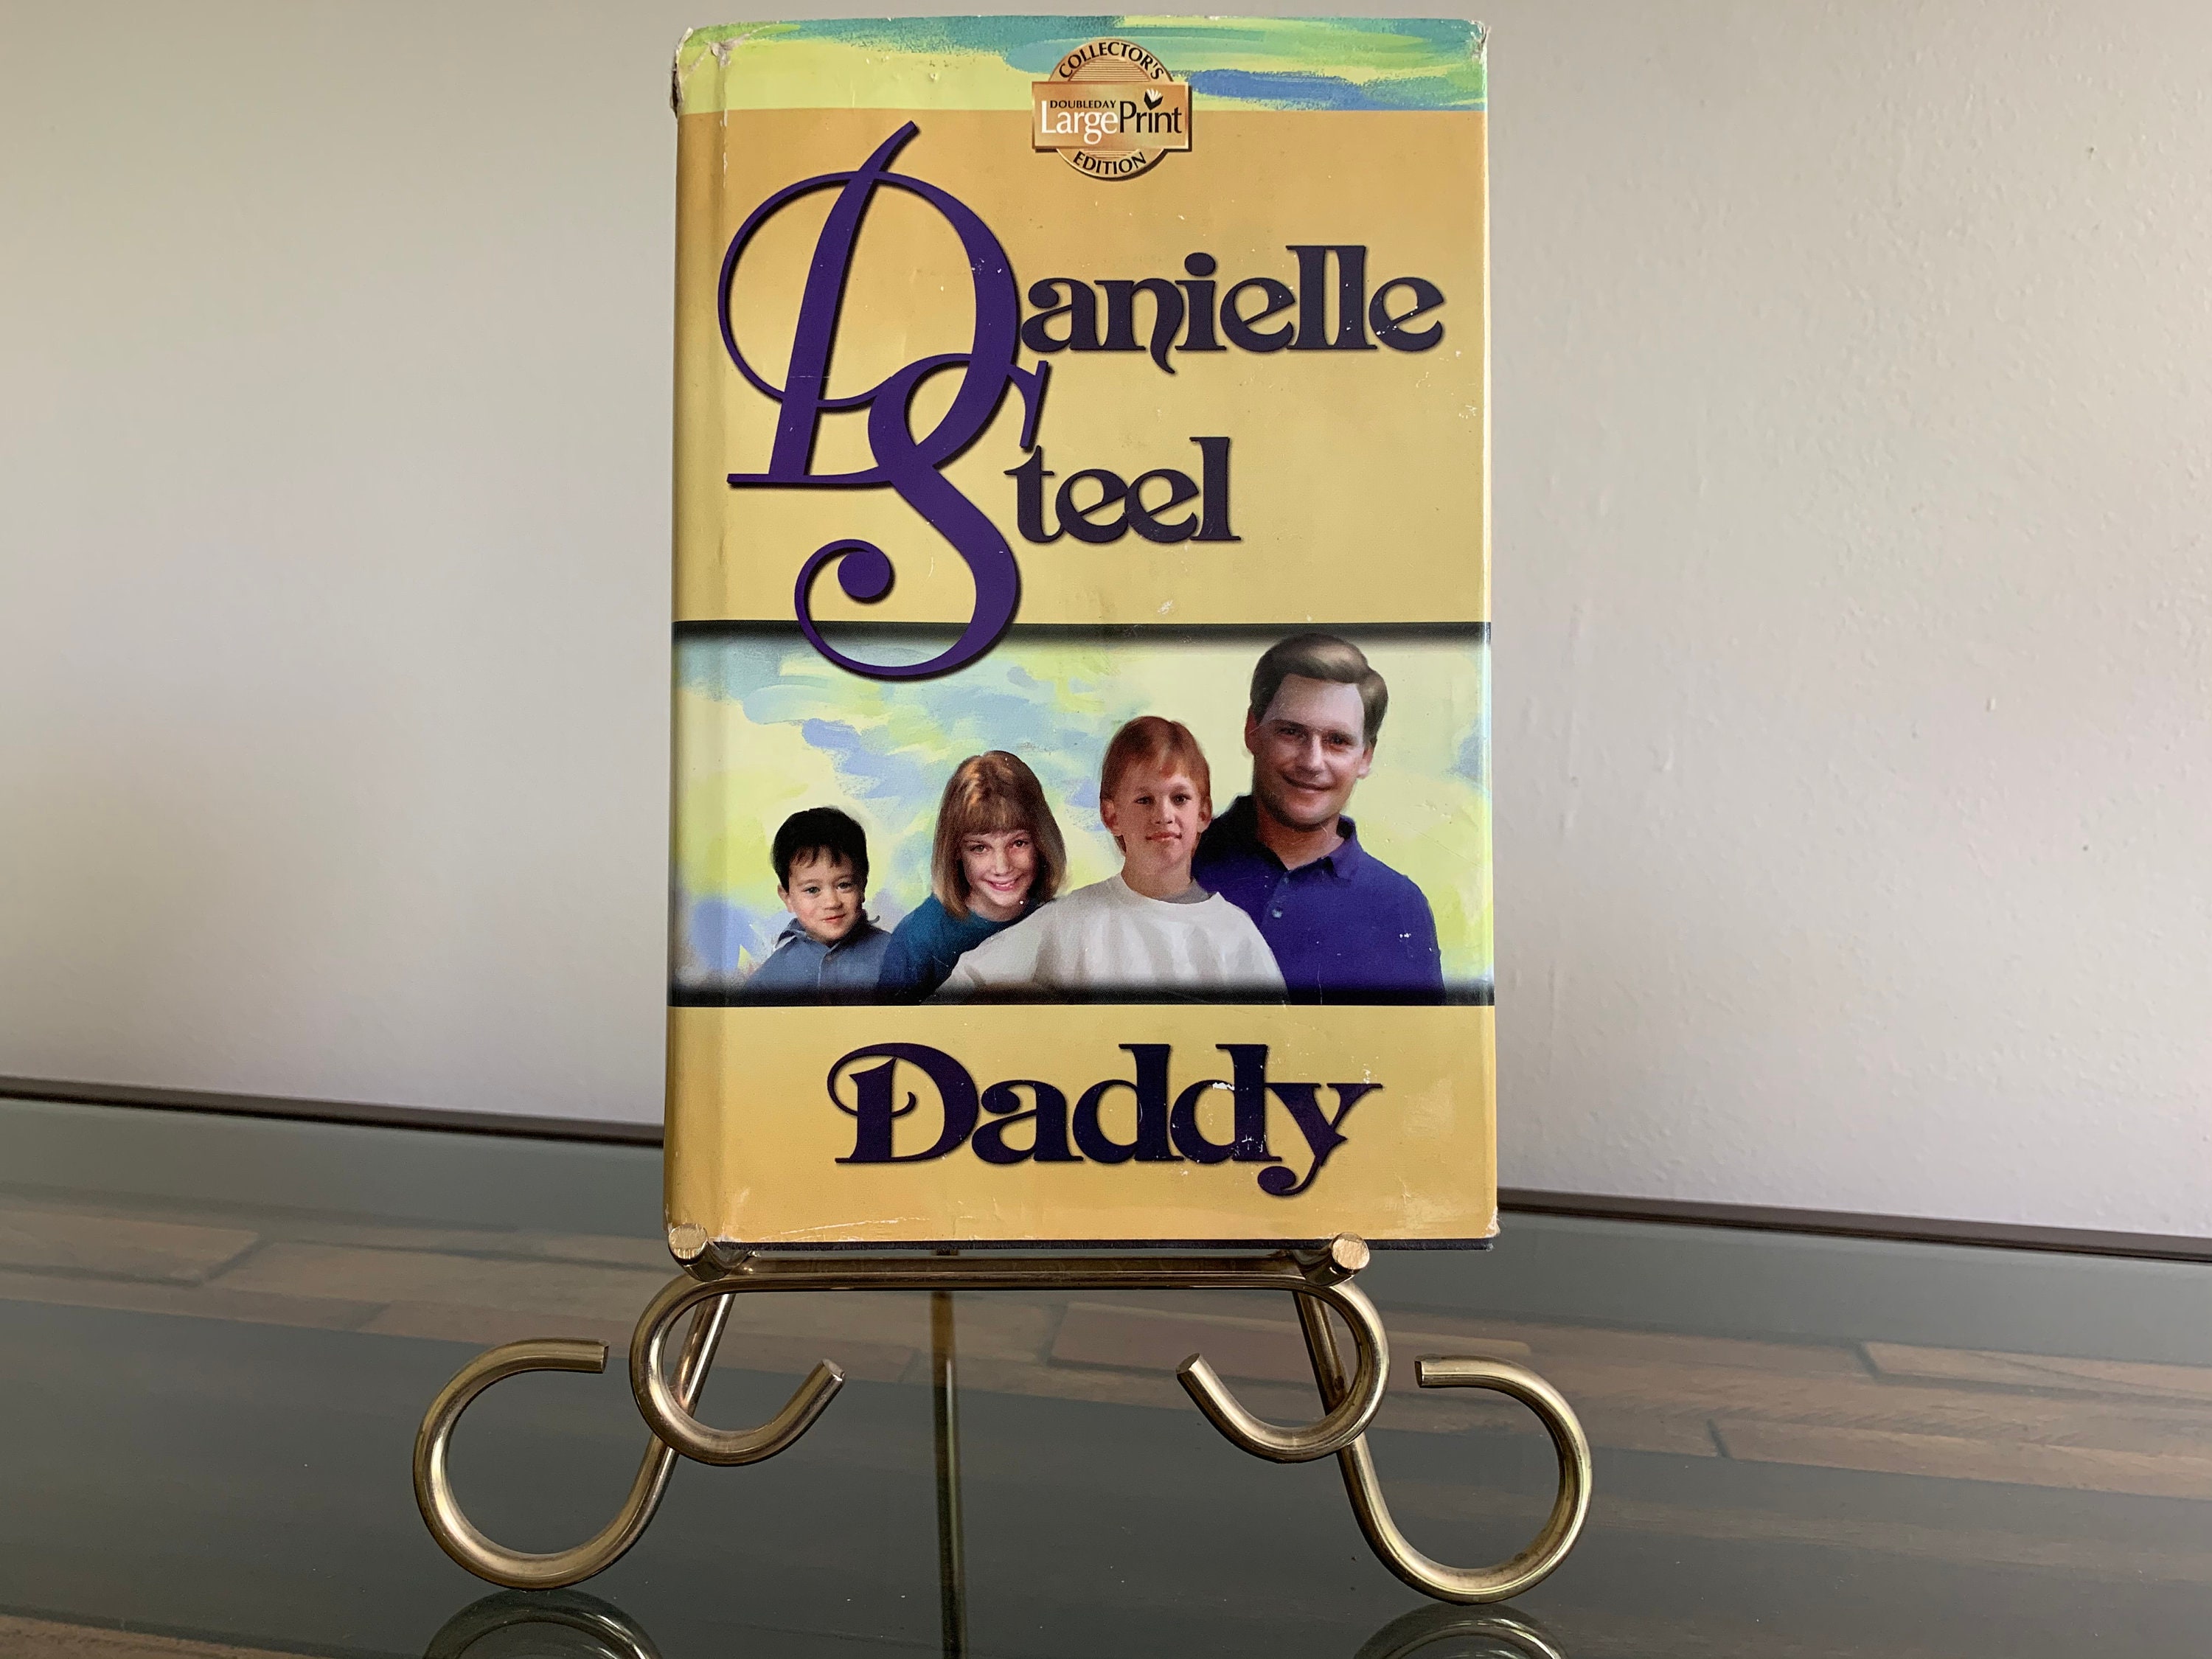 Daddy by Danielle Steel, Hardcover